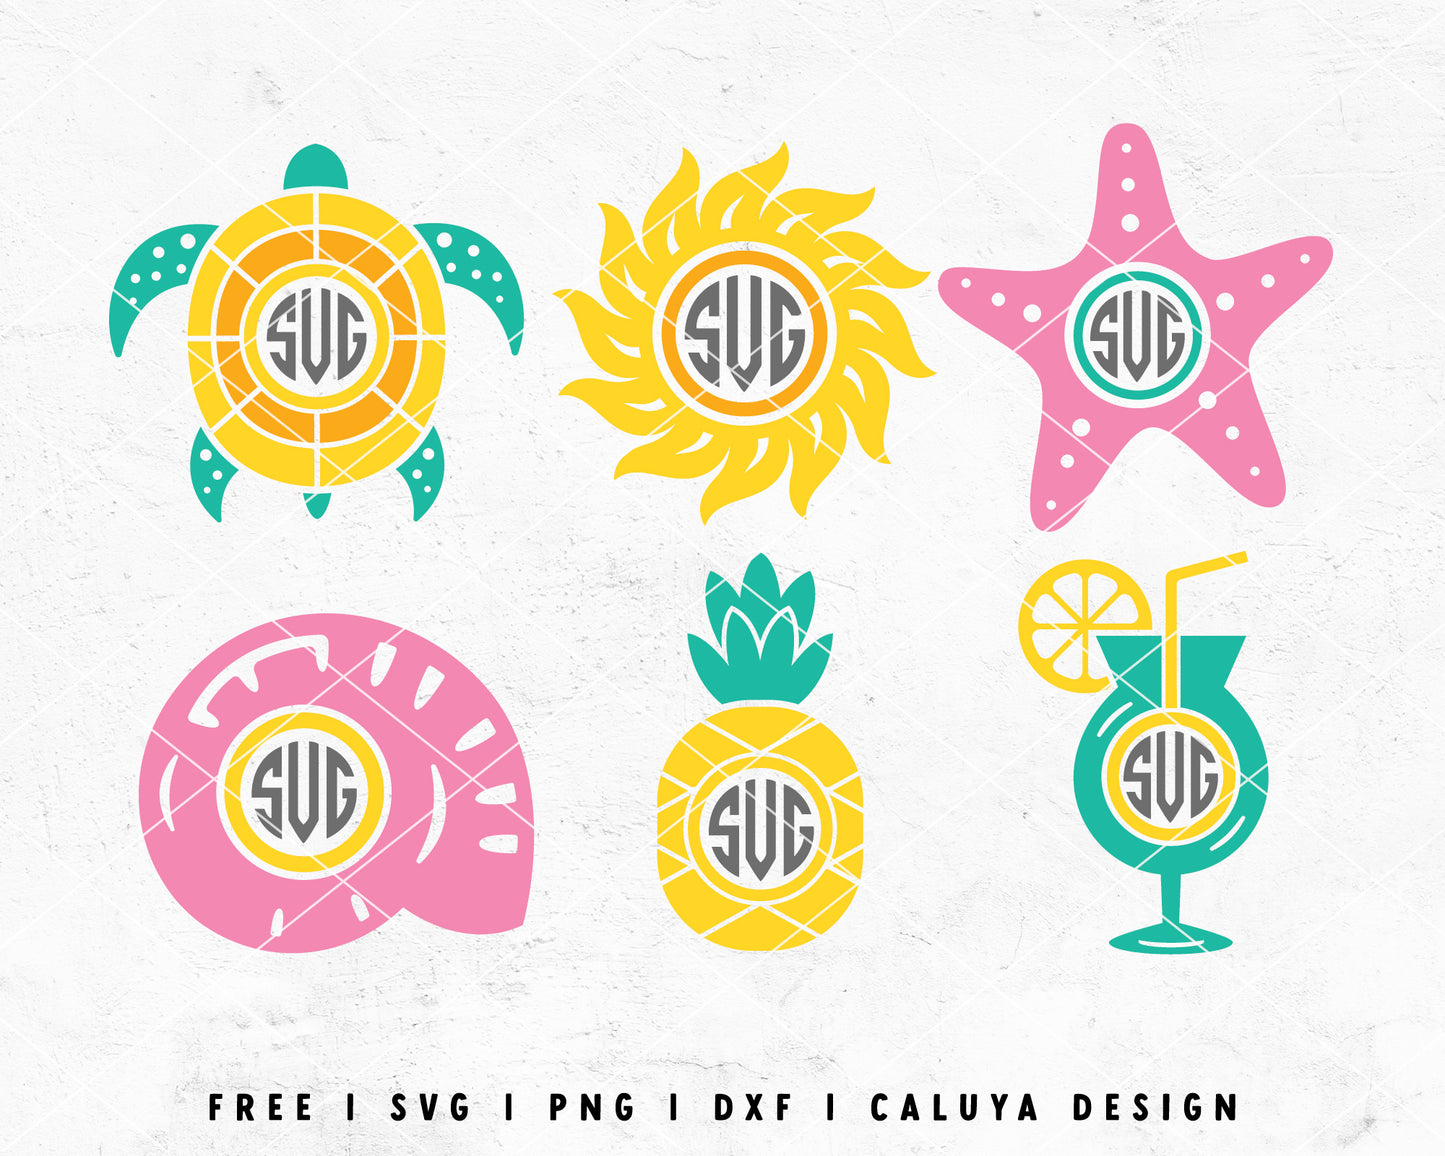 FREE Summer SVG | Shell SVG | Monogram SVG Cut File for Cricut, Cameo Silhouette | Free SVG Cut File